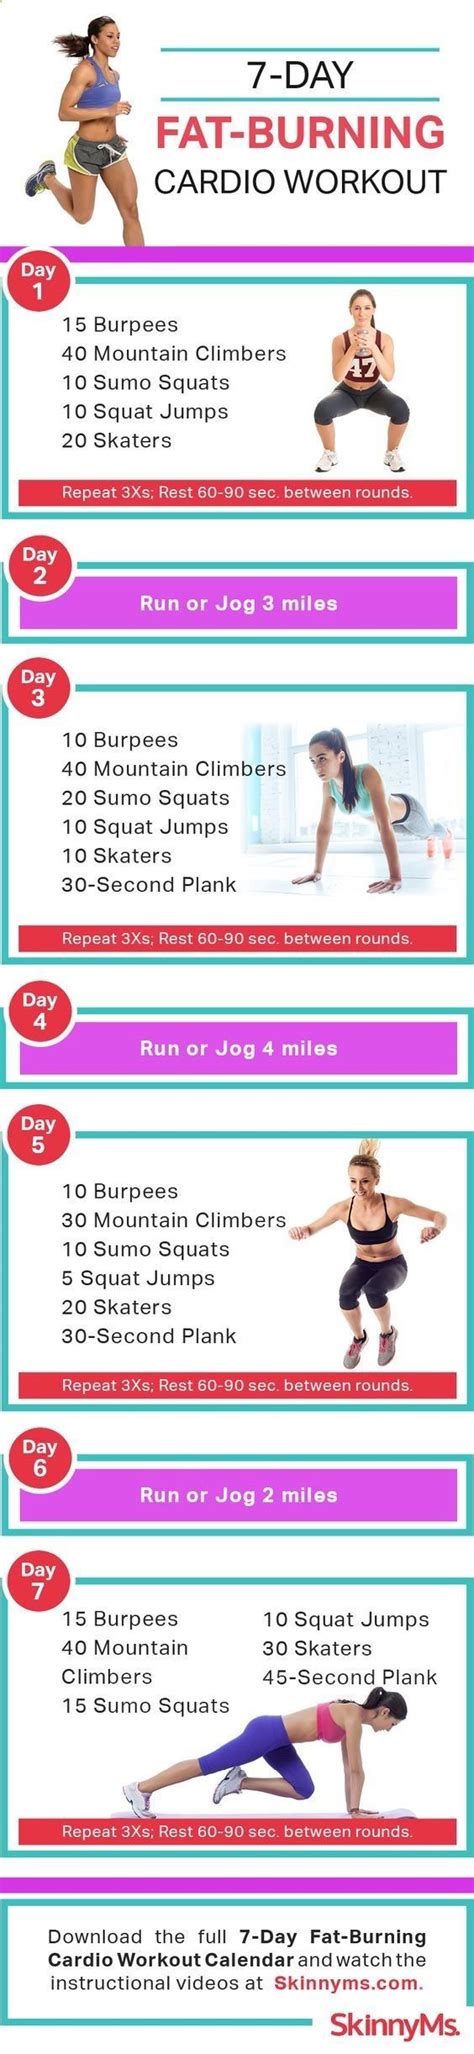 What Is The Most Effective Cardio To Burn Fat Cardio Workout Exercises